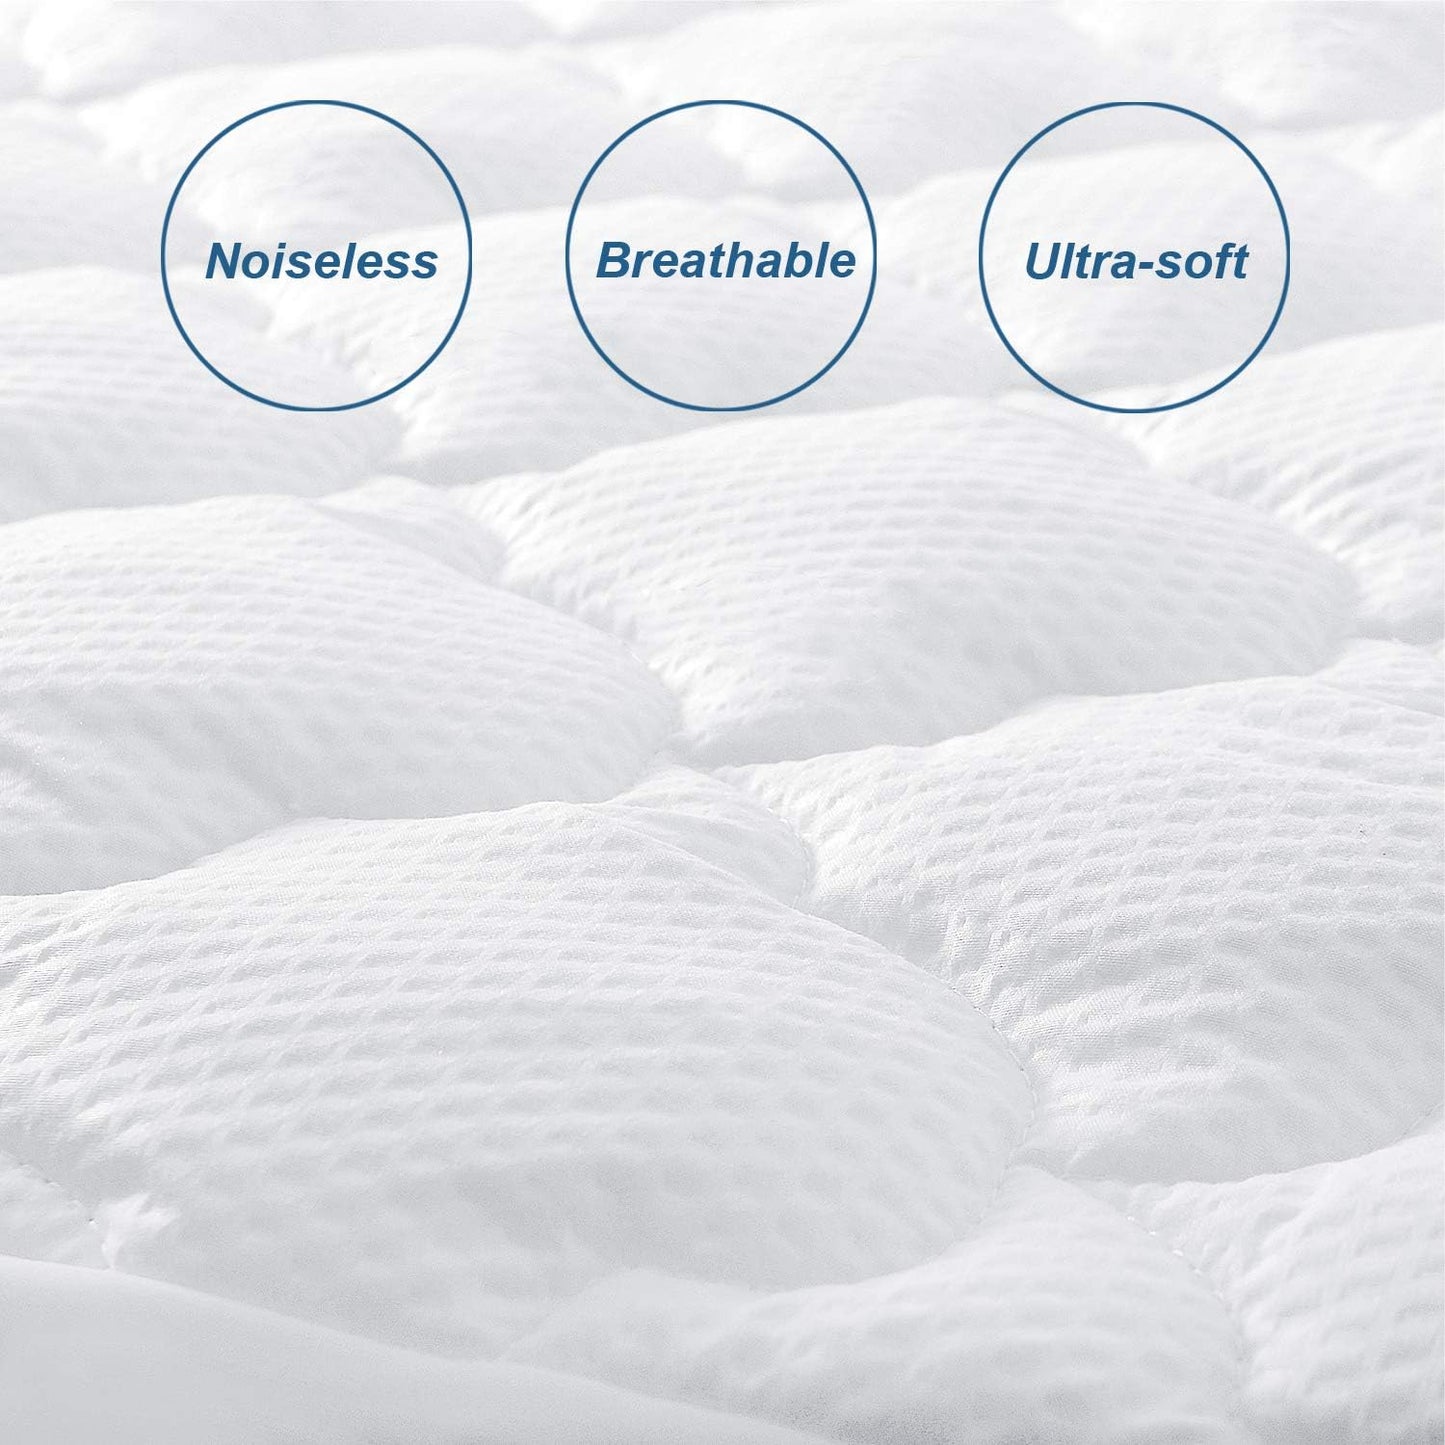 Mattress Cover/Protector- ,Breathable Cloud Quilted, Durable, Noisless,Microfiber